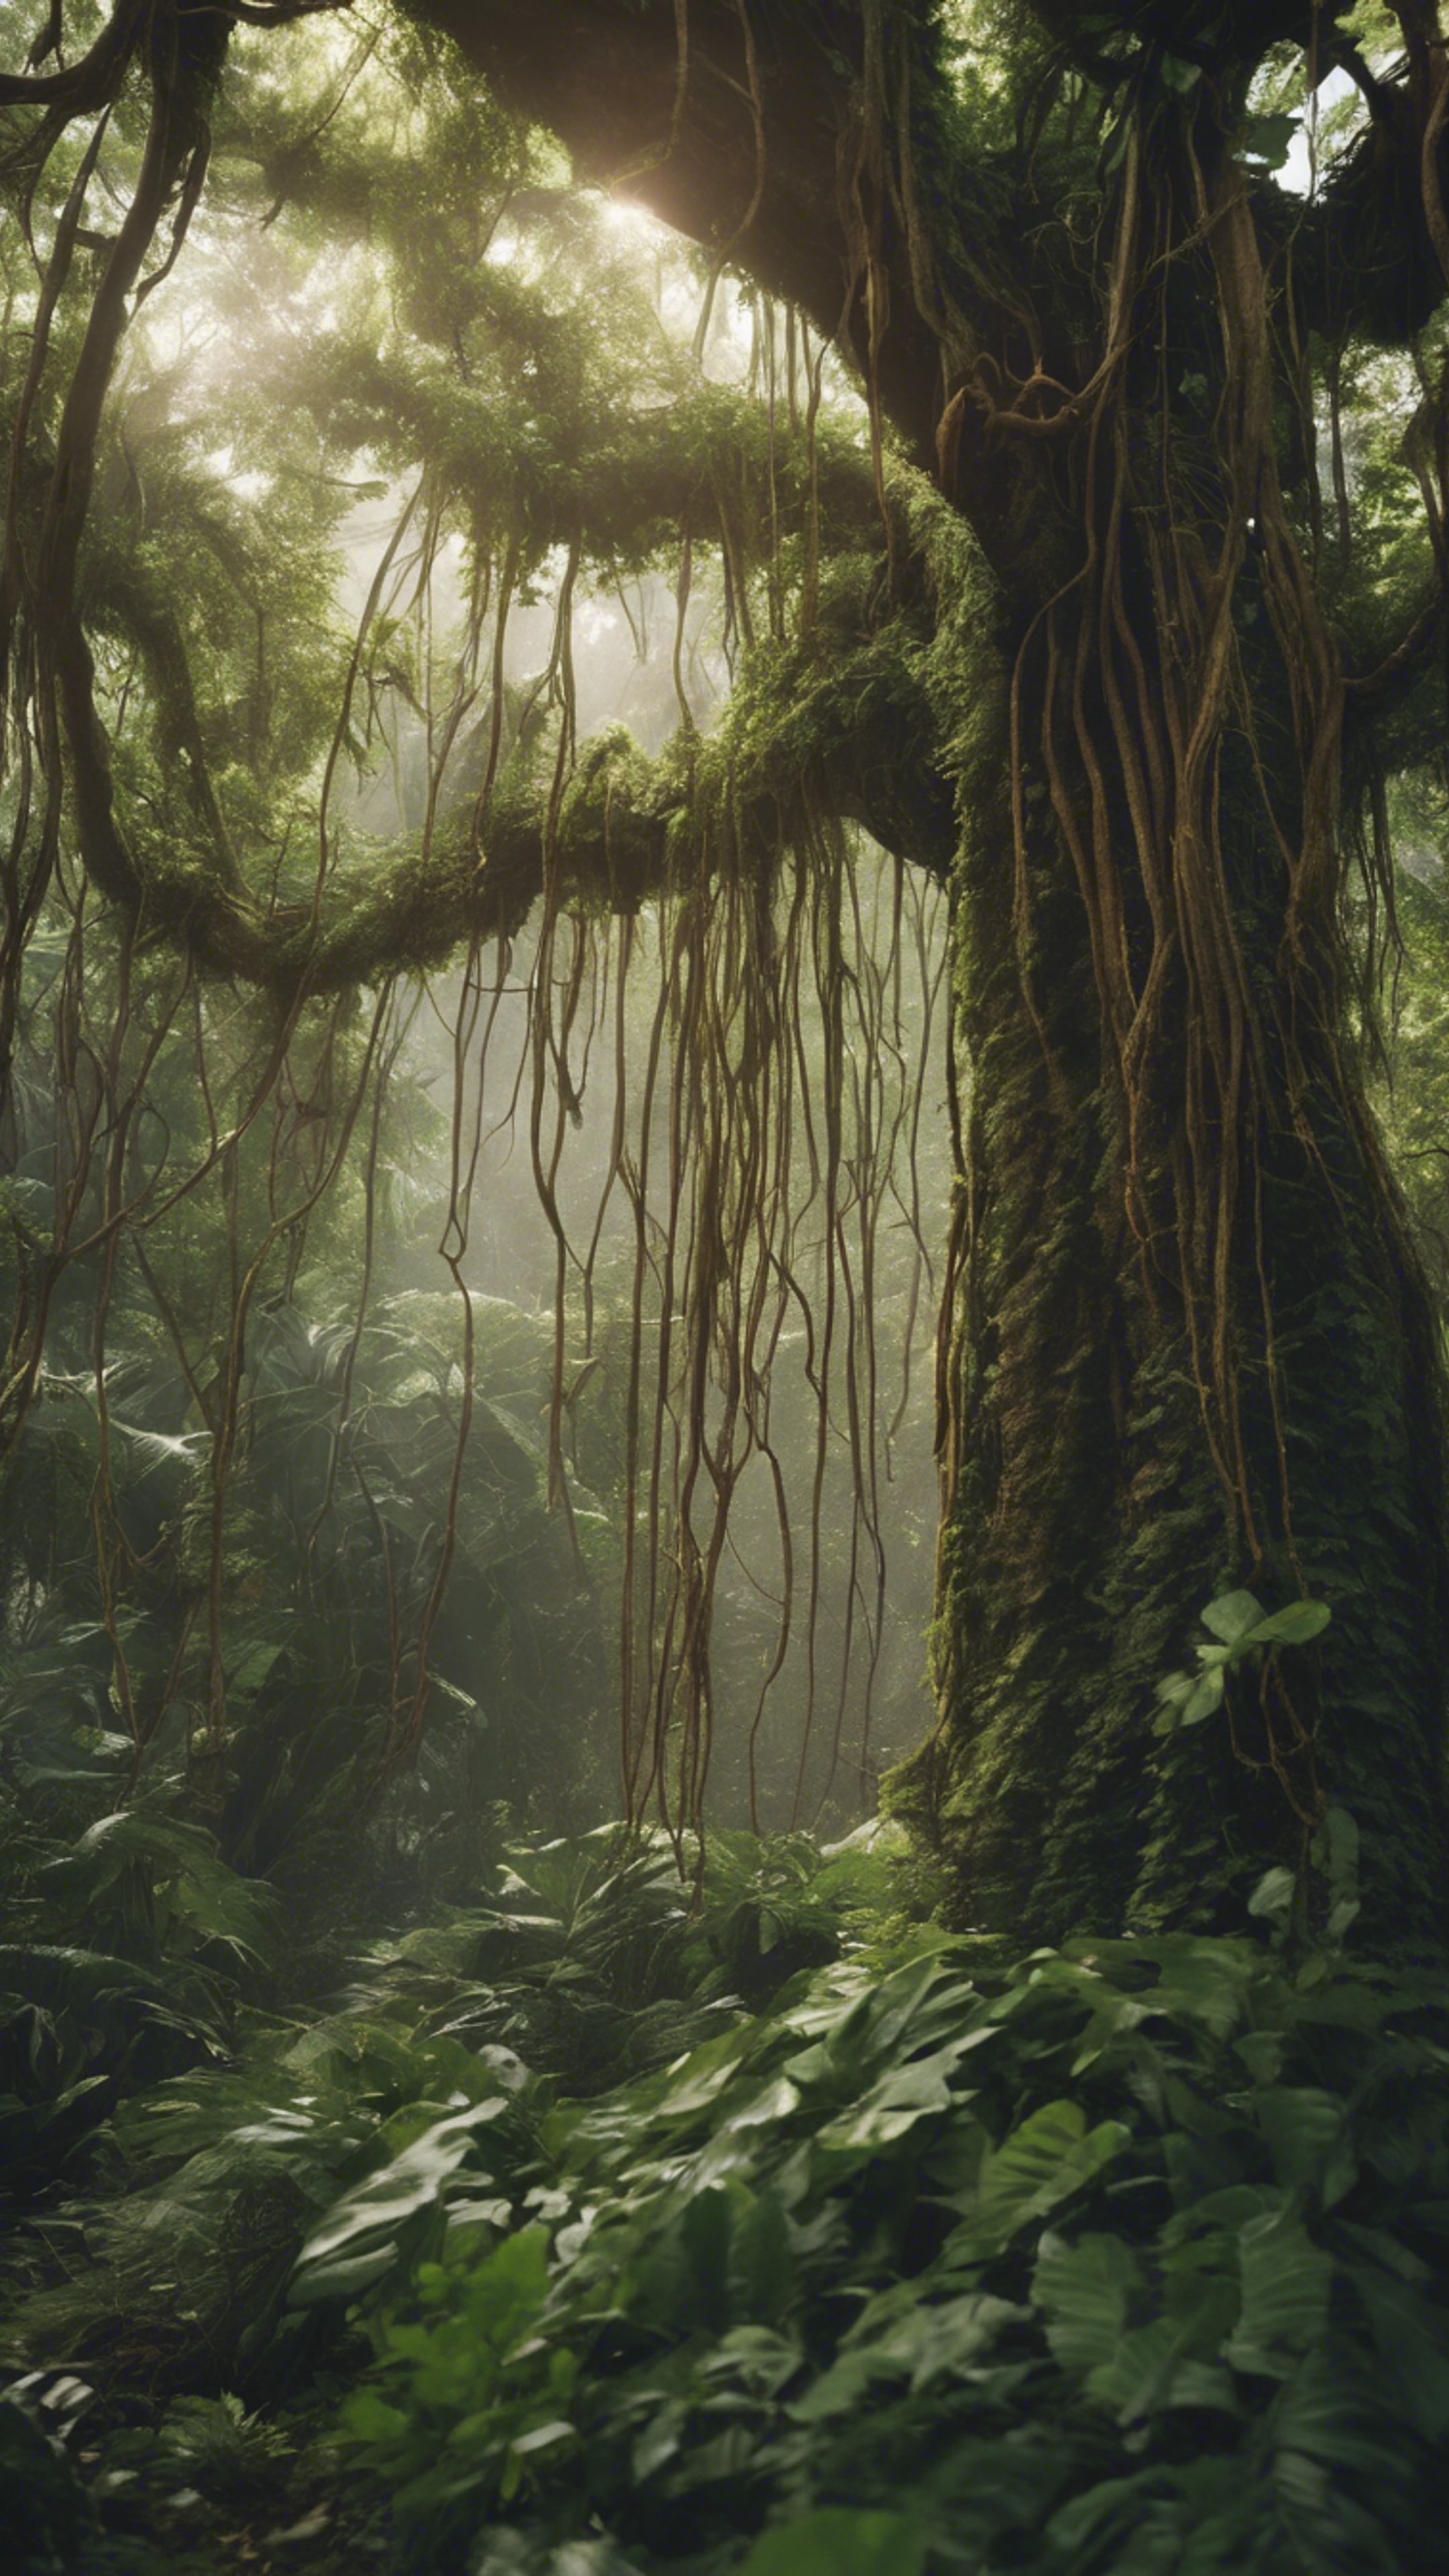 A wild, lush green jungle with a brown tree trunk, heavily draped in hanging vines.壁紙[b85ec9bc375843c087dc]